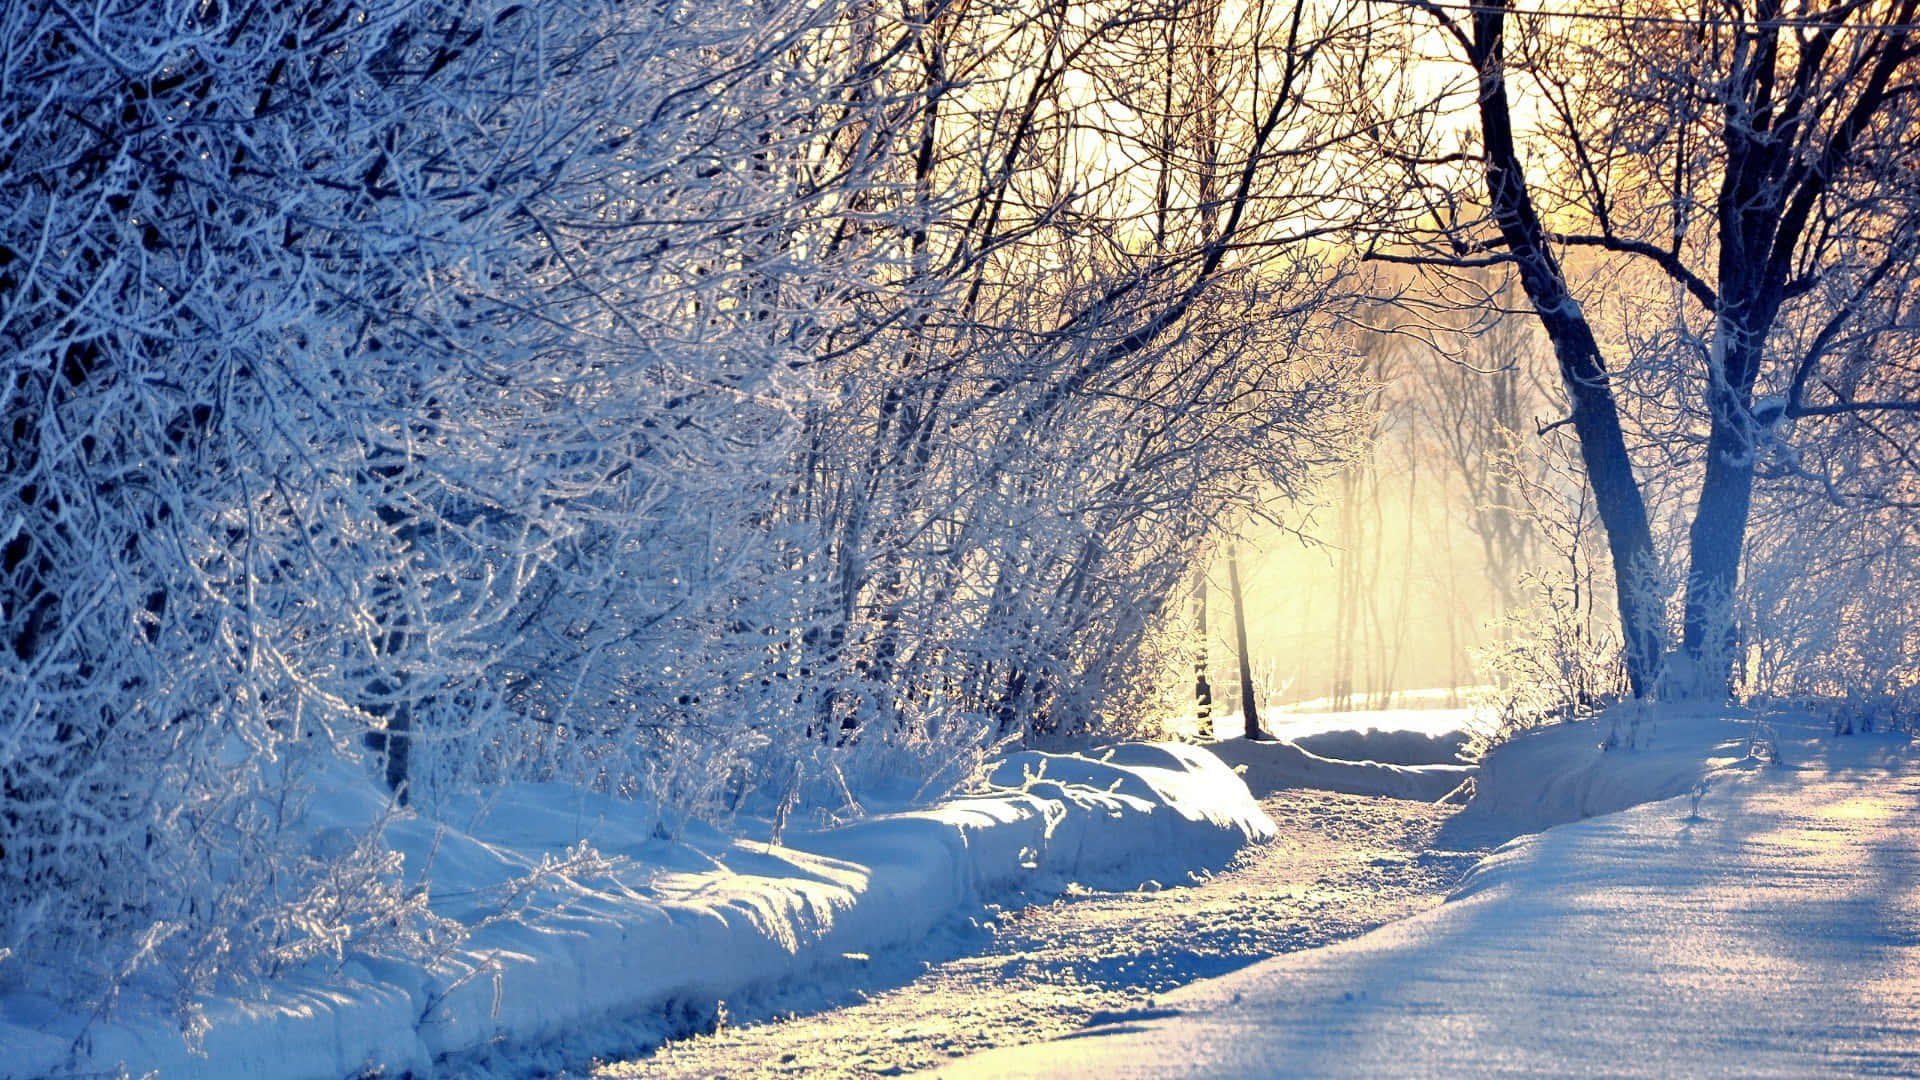 Enjoy the beauty of a winter forest